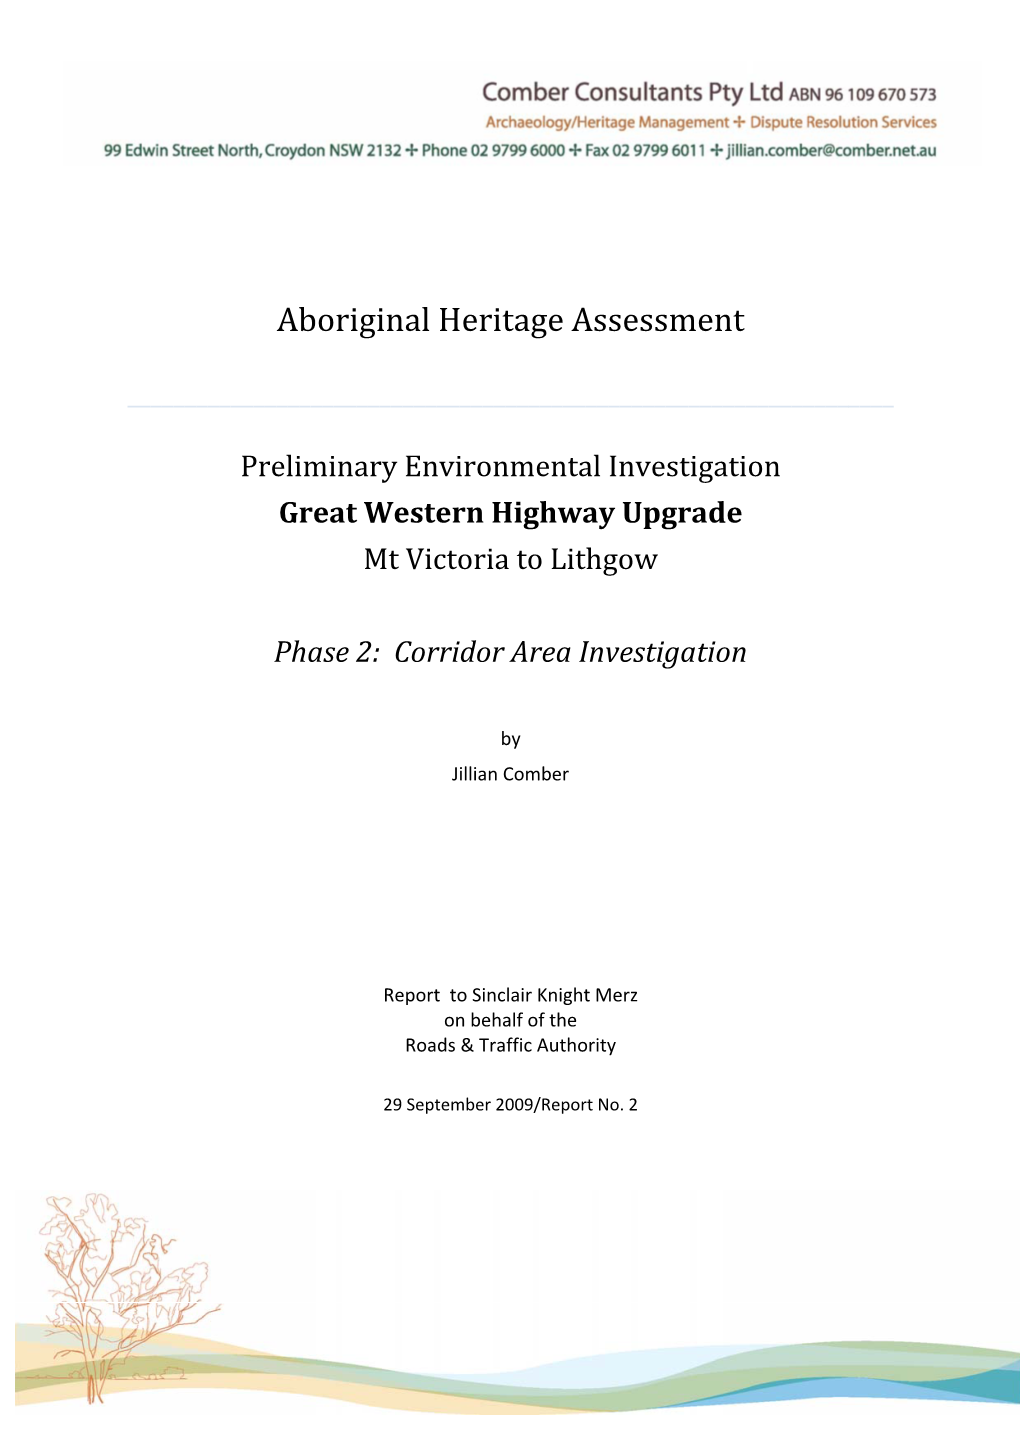 Mount Victoria to Lithgow Indigenous Heritage Working Paper